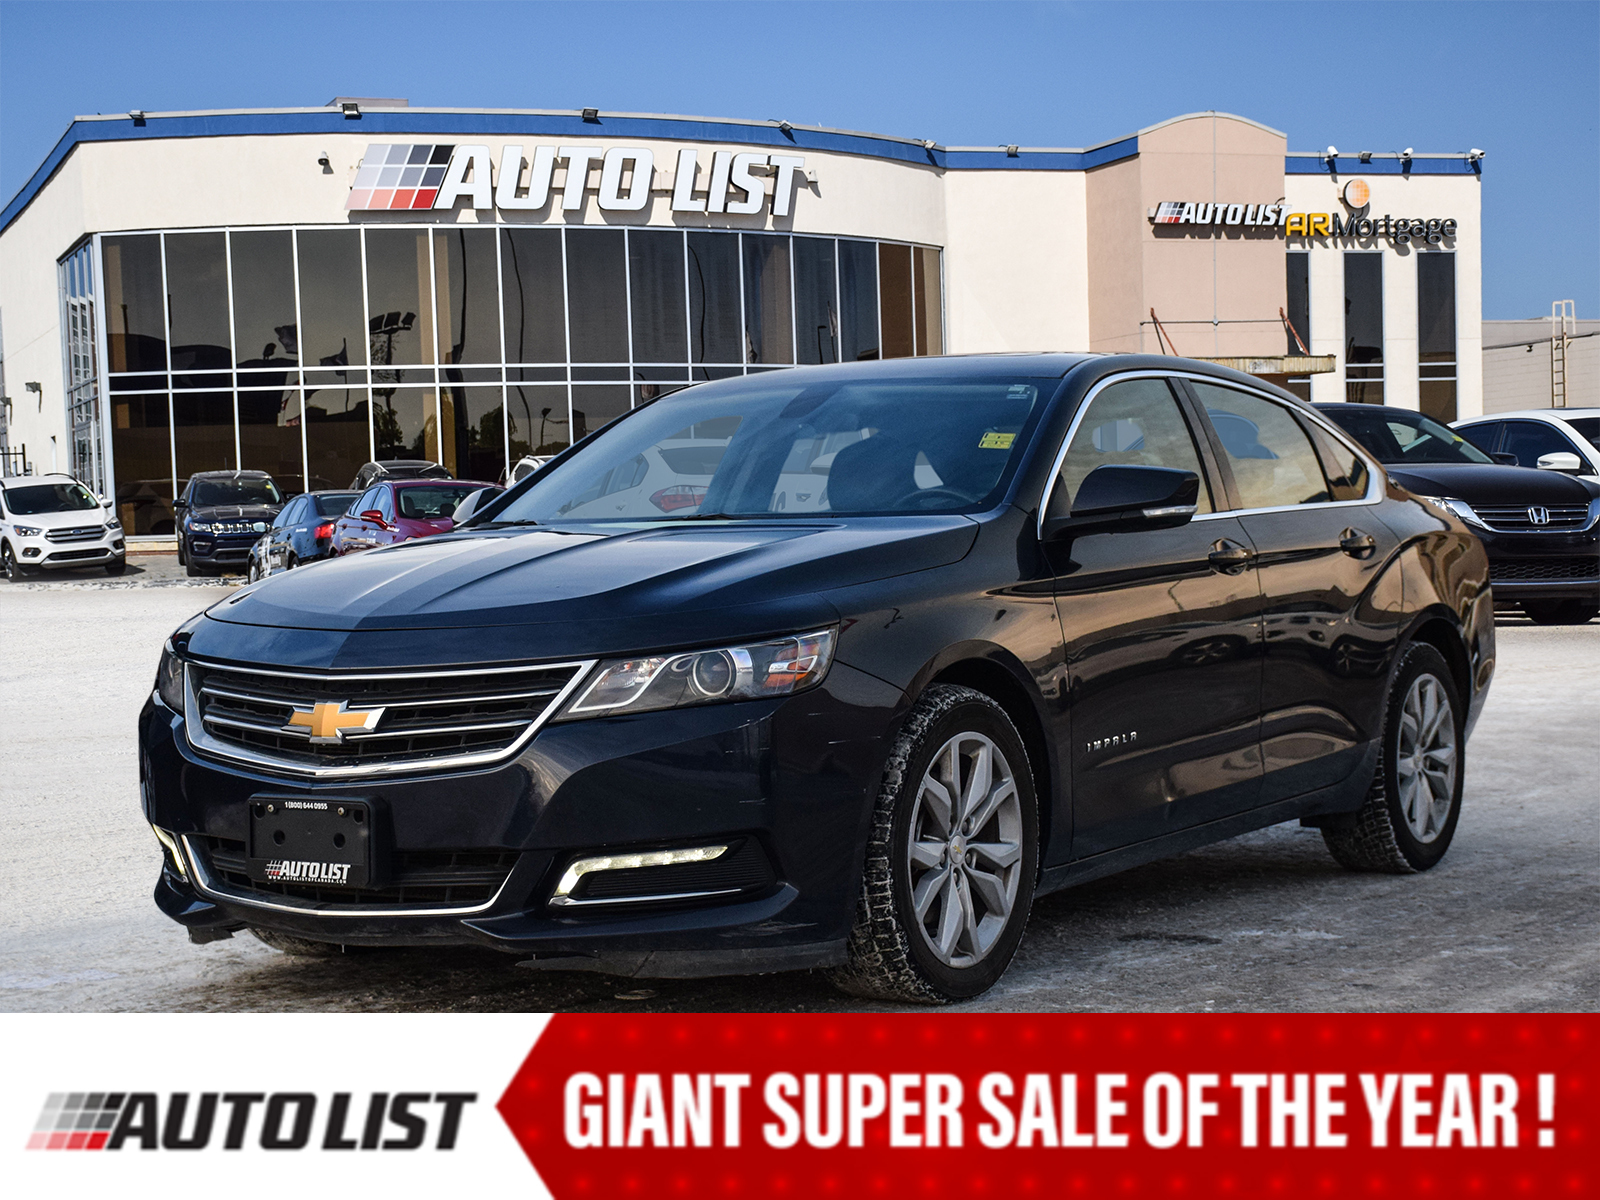 2019 Chevrolet Impala LT*LEATHER*PANOROOF*VOICE COMMAND*HEATED SEATS*